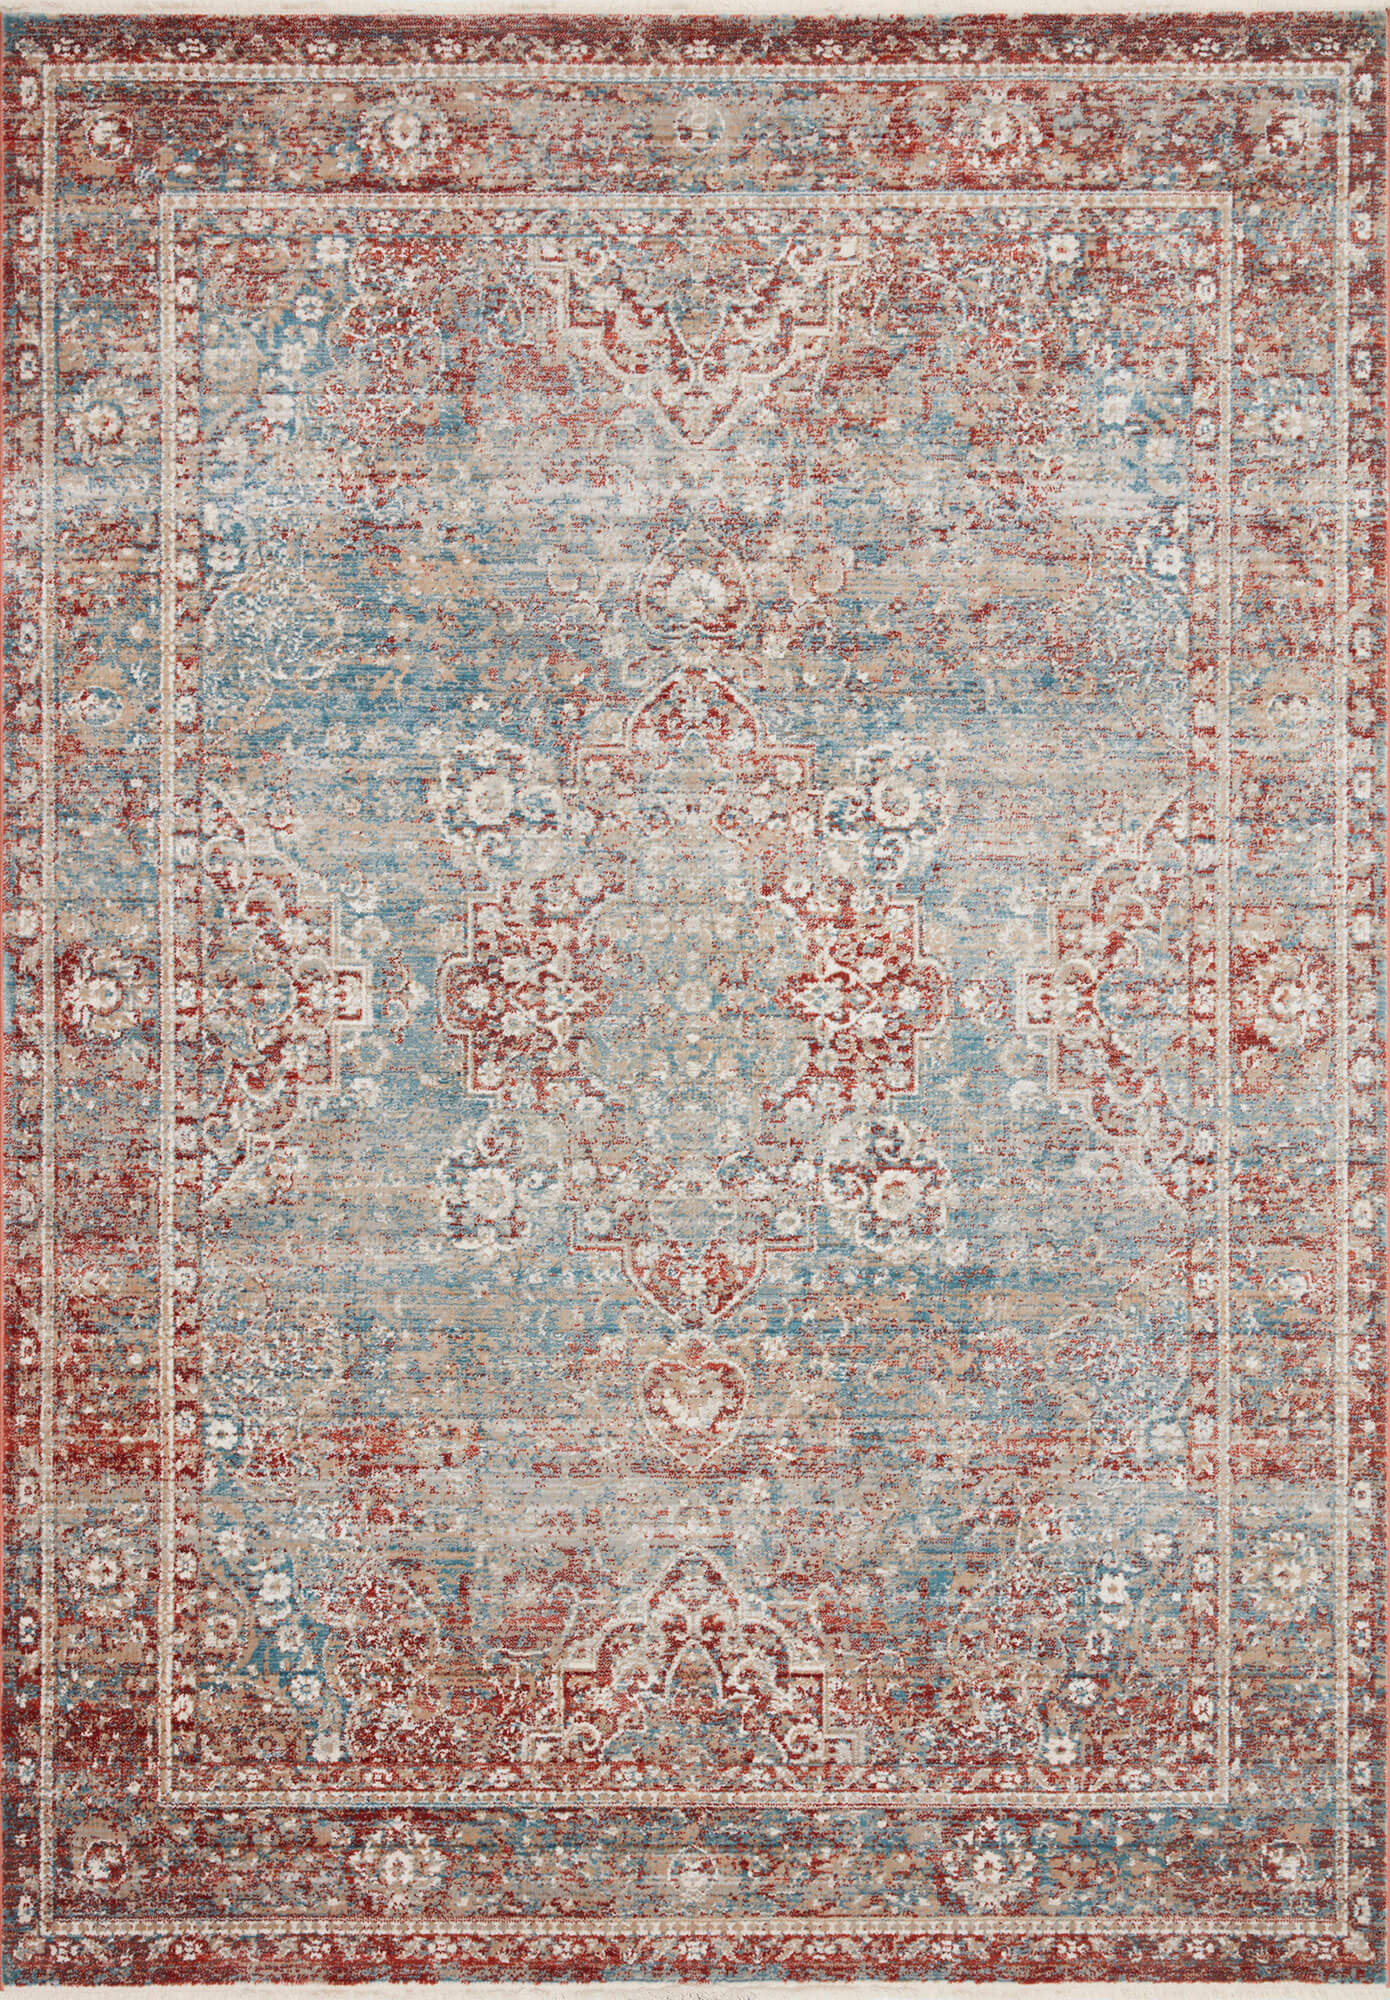 Magnolia Home By Joanna Gaines x Loloi Elise Rug - Sky & Red